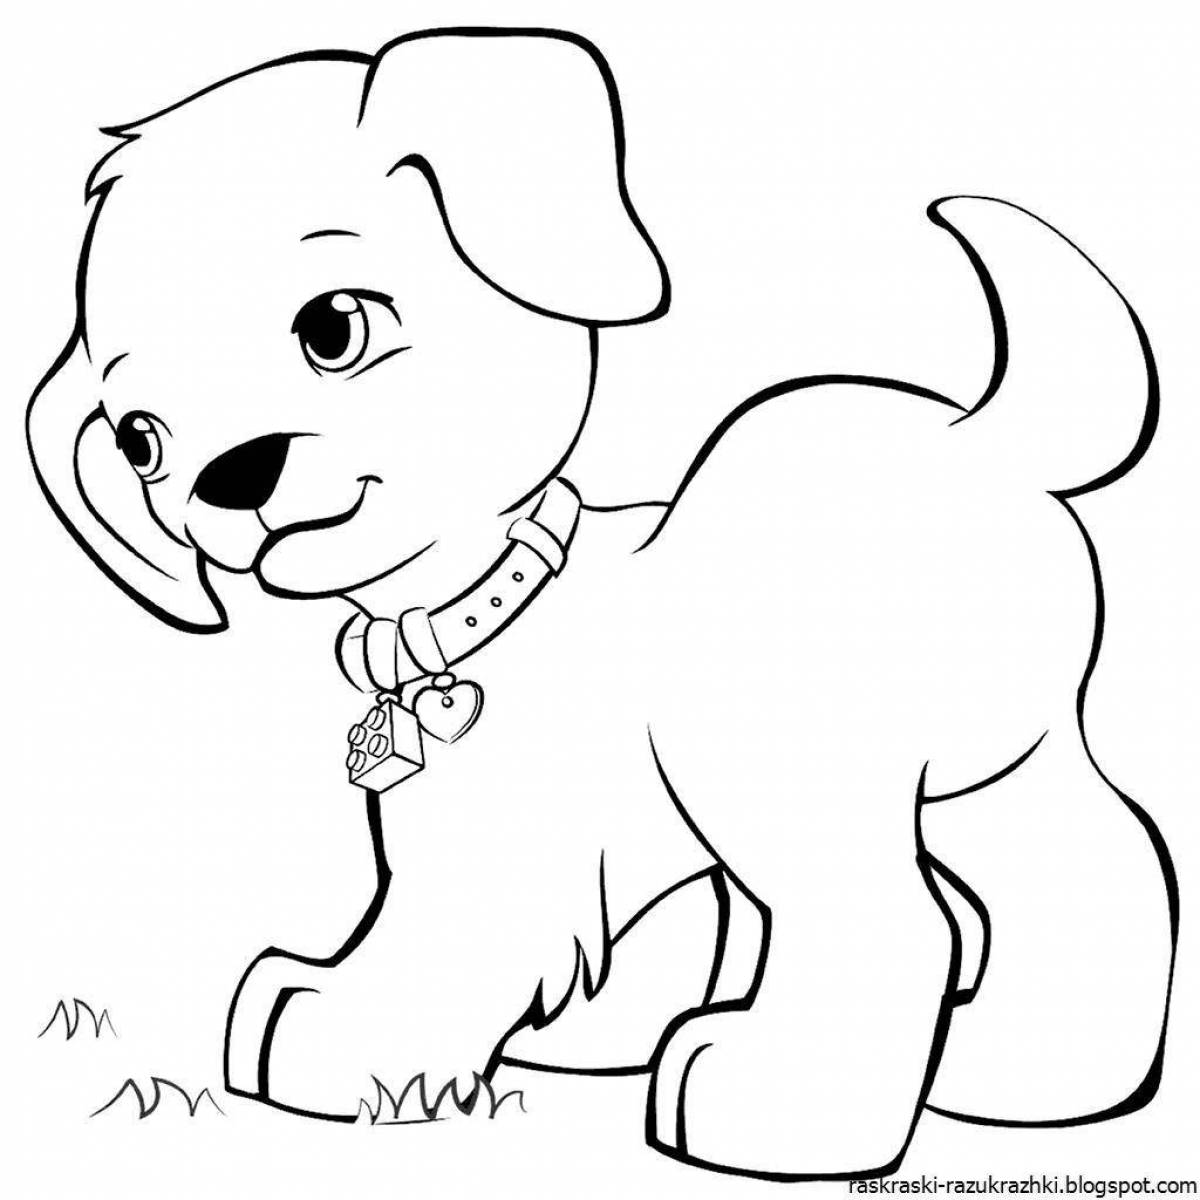 Bring the dog coloring page for 4-5 year olds